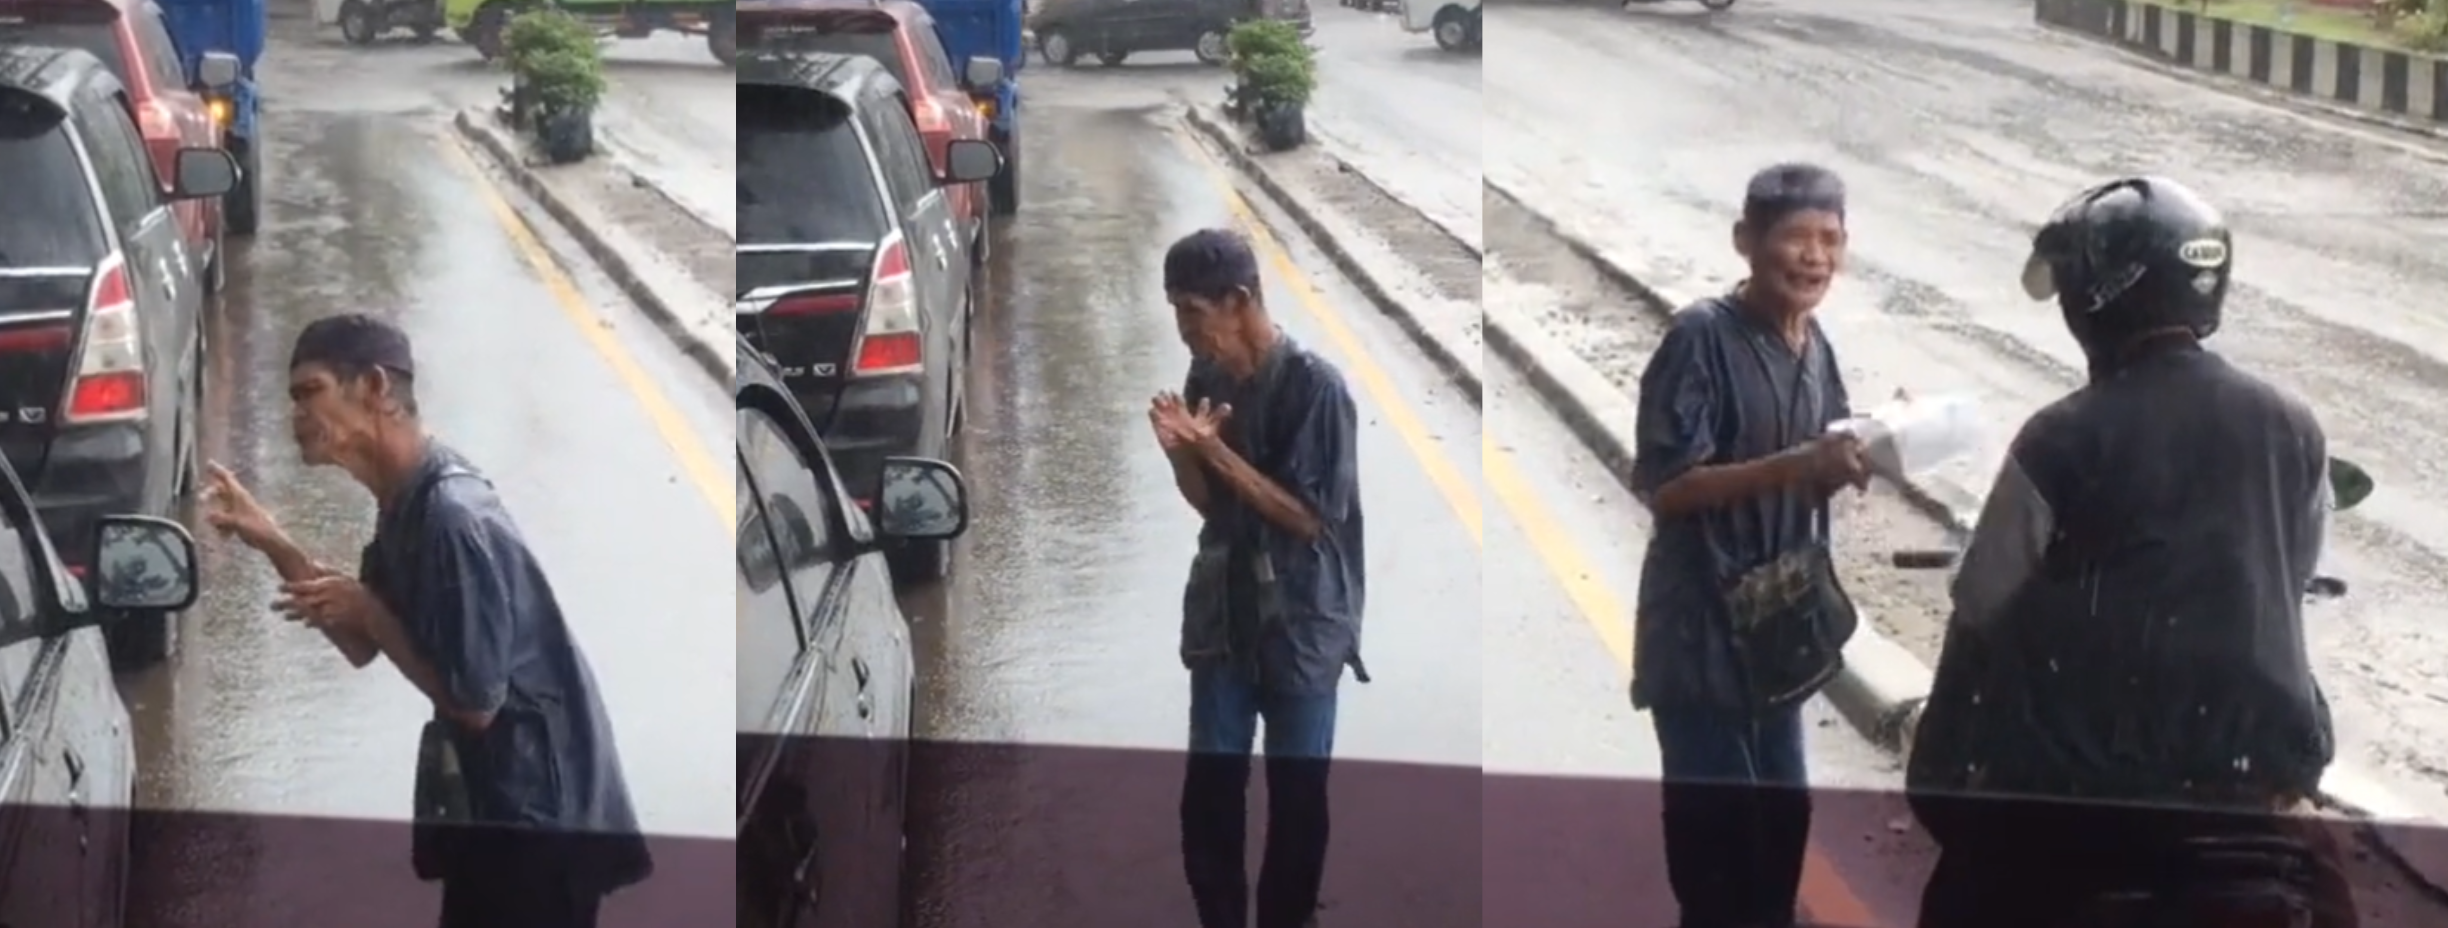 The “hero” stopped his bike and handed the drenched OKU man food as an act of kindness.